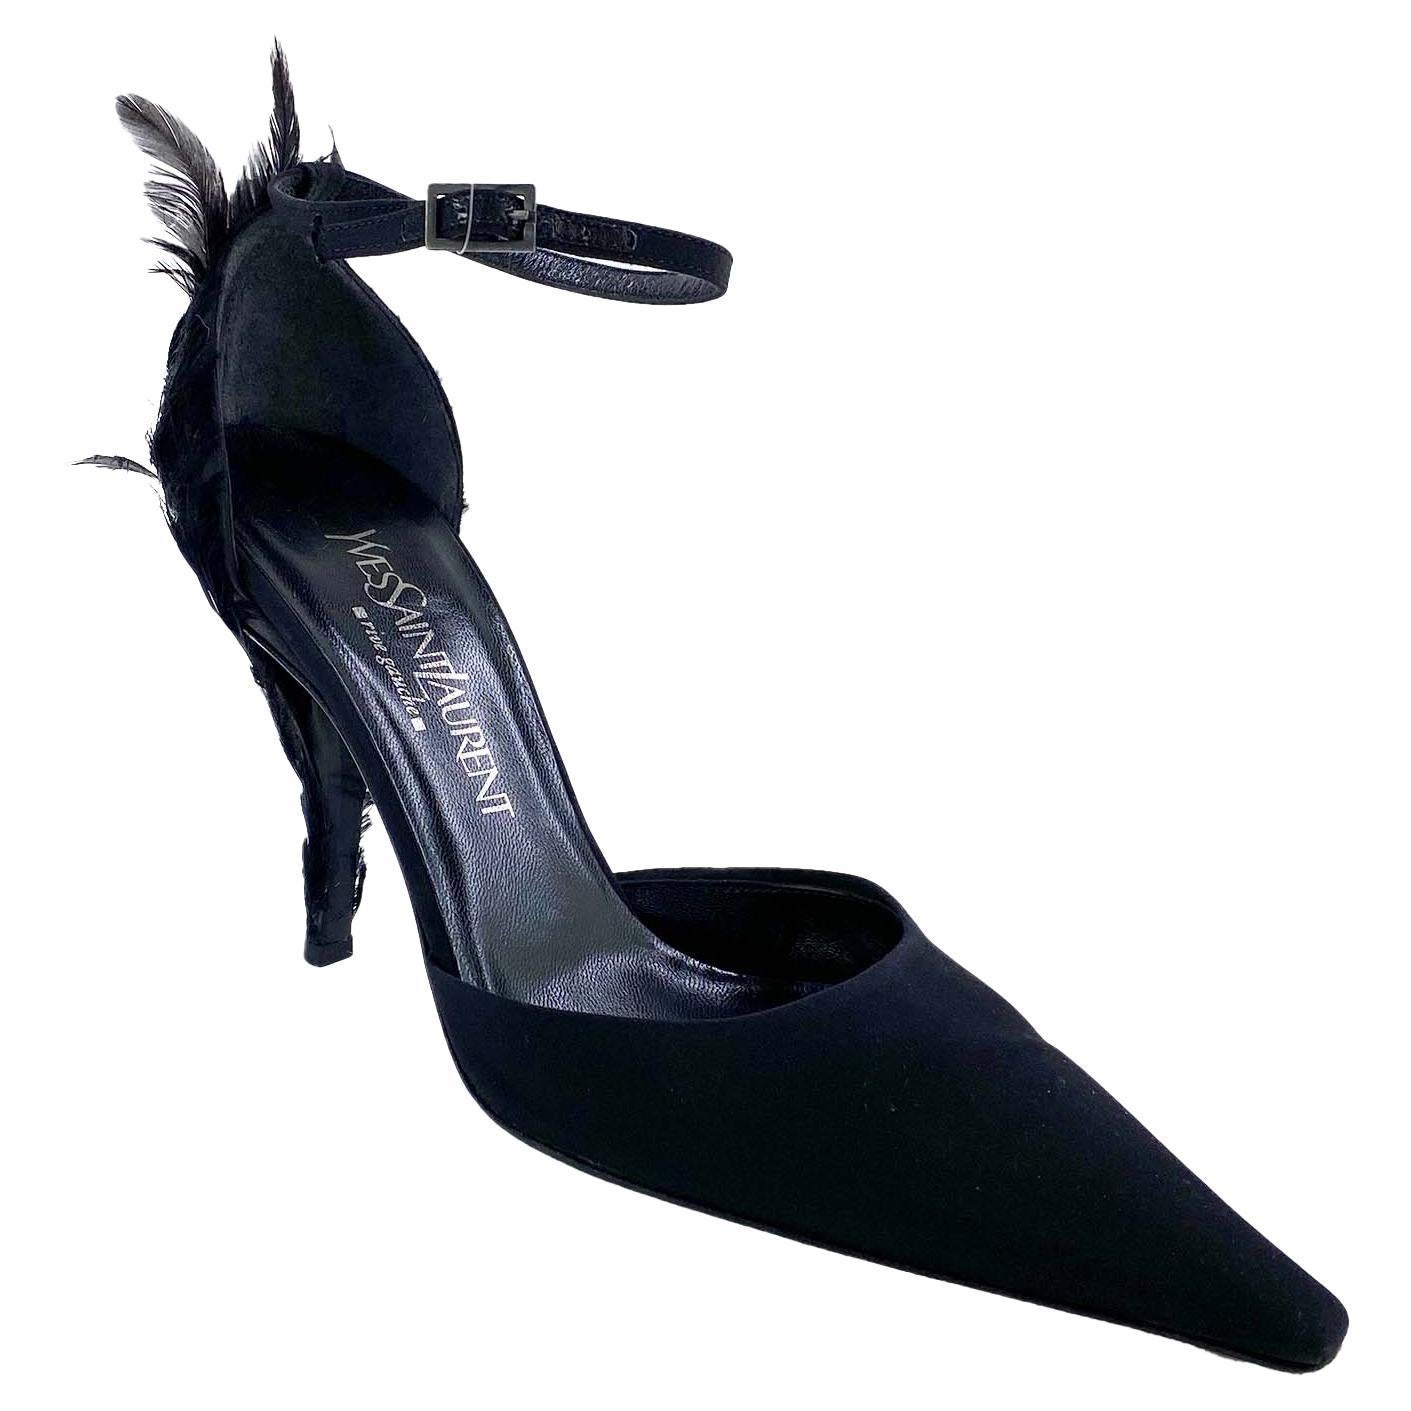 S/S 2001 Yves Saint Laurent by Tom Ford Feather Black Satin Pointed Toe Pump  For Sale